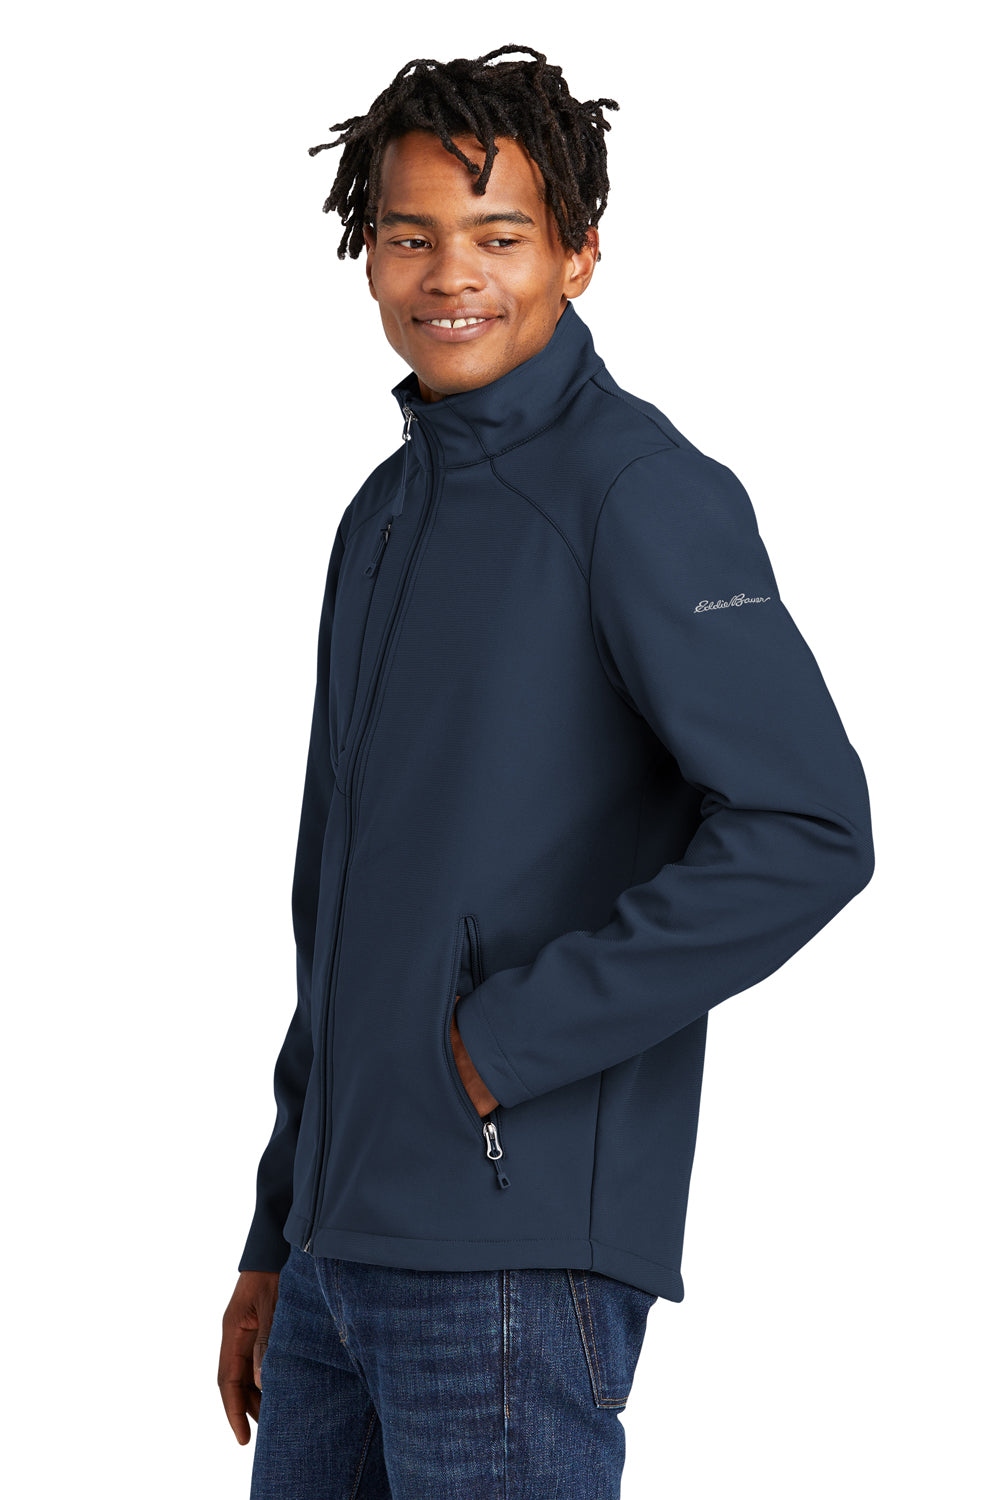 Eddie Bauer EB544 Mens Water Resistant Stretch Full Zip Soft Shell Jacket River Navy Blue Model Side